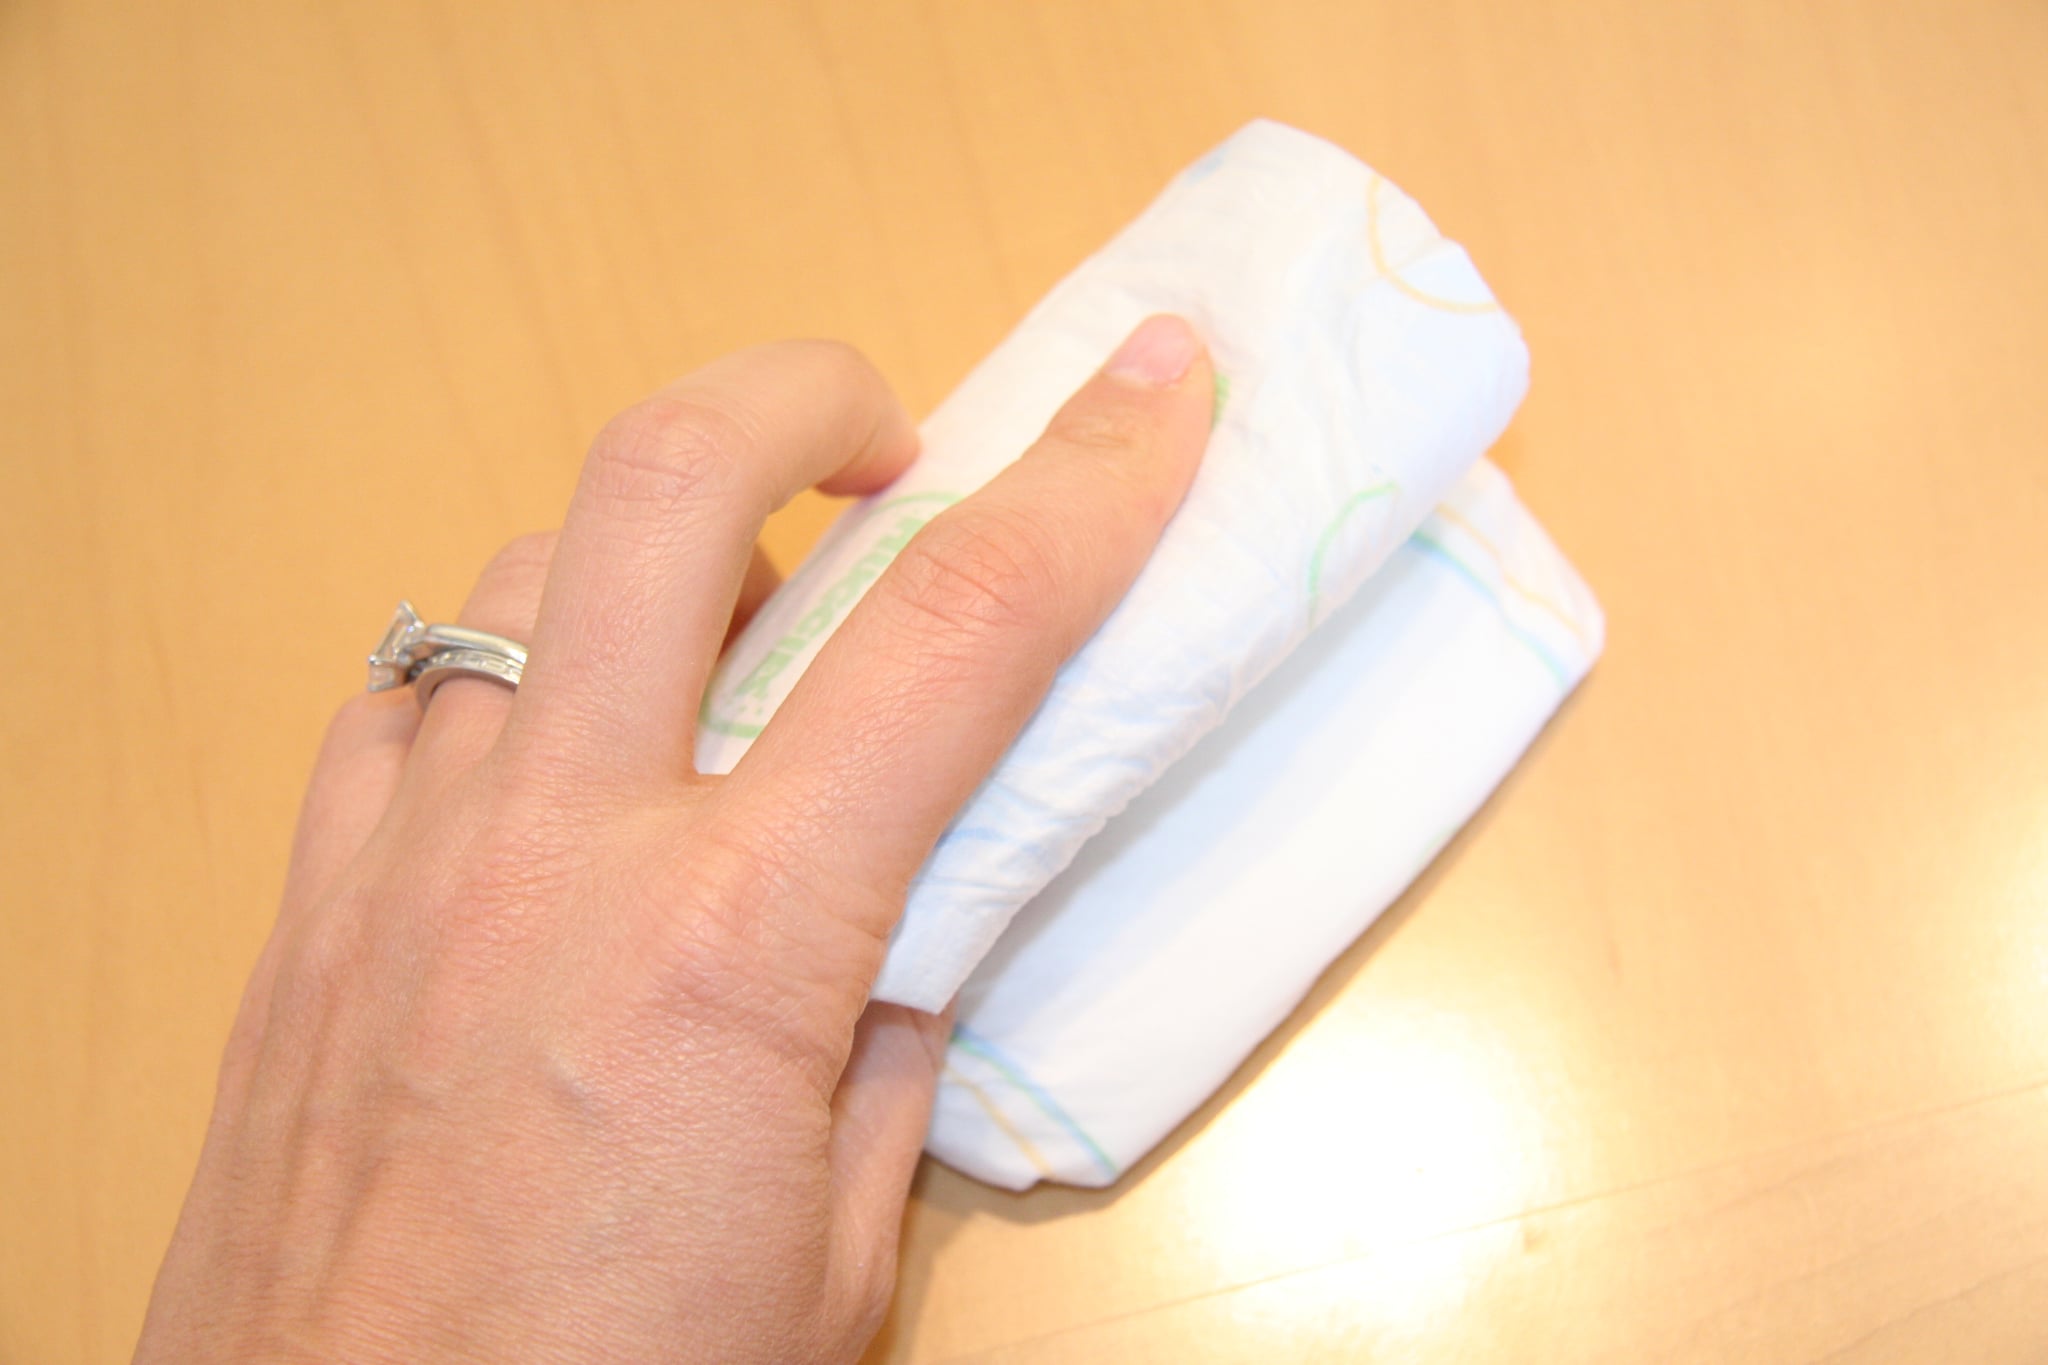 Since the loop is smaller, you will have to fold the diaper three ways. 